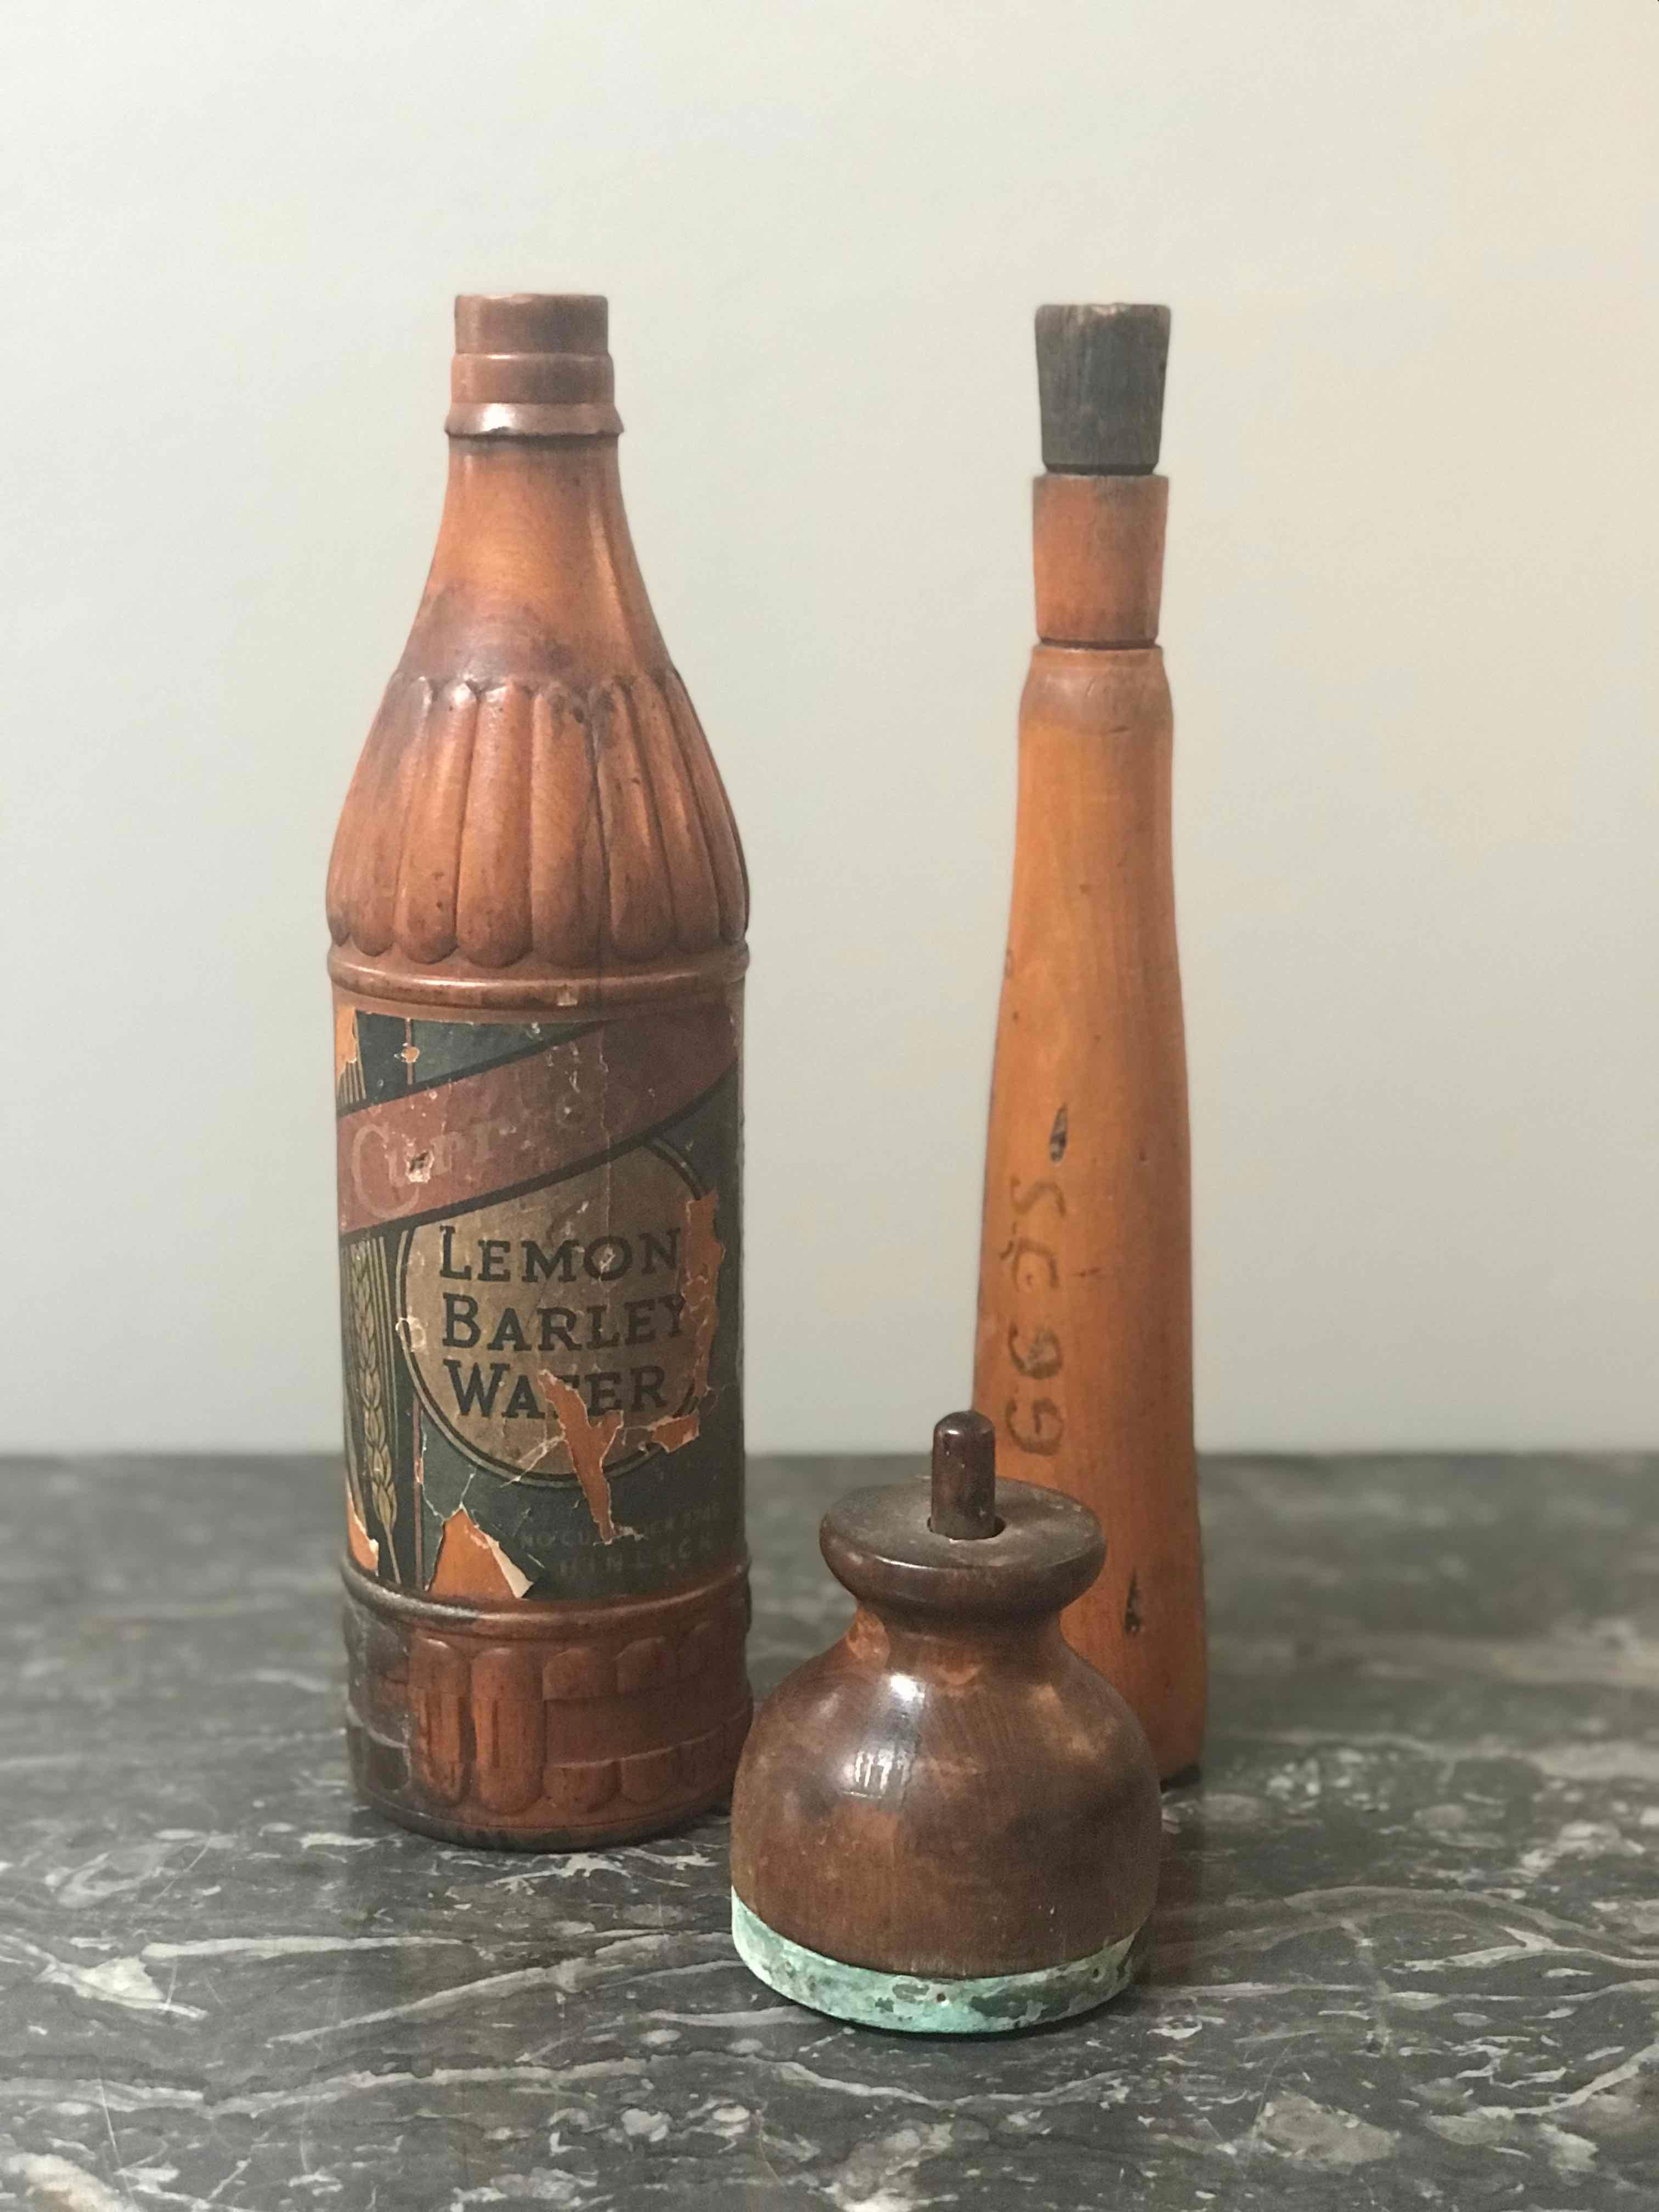 Collection of early 20th century wooden bottle molds from the John Lamb and Co. Glassworks in Castlelford, West Yorkshire. 25 piece set (24 bottles and 1 stamp)